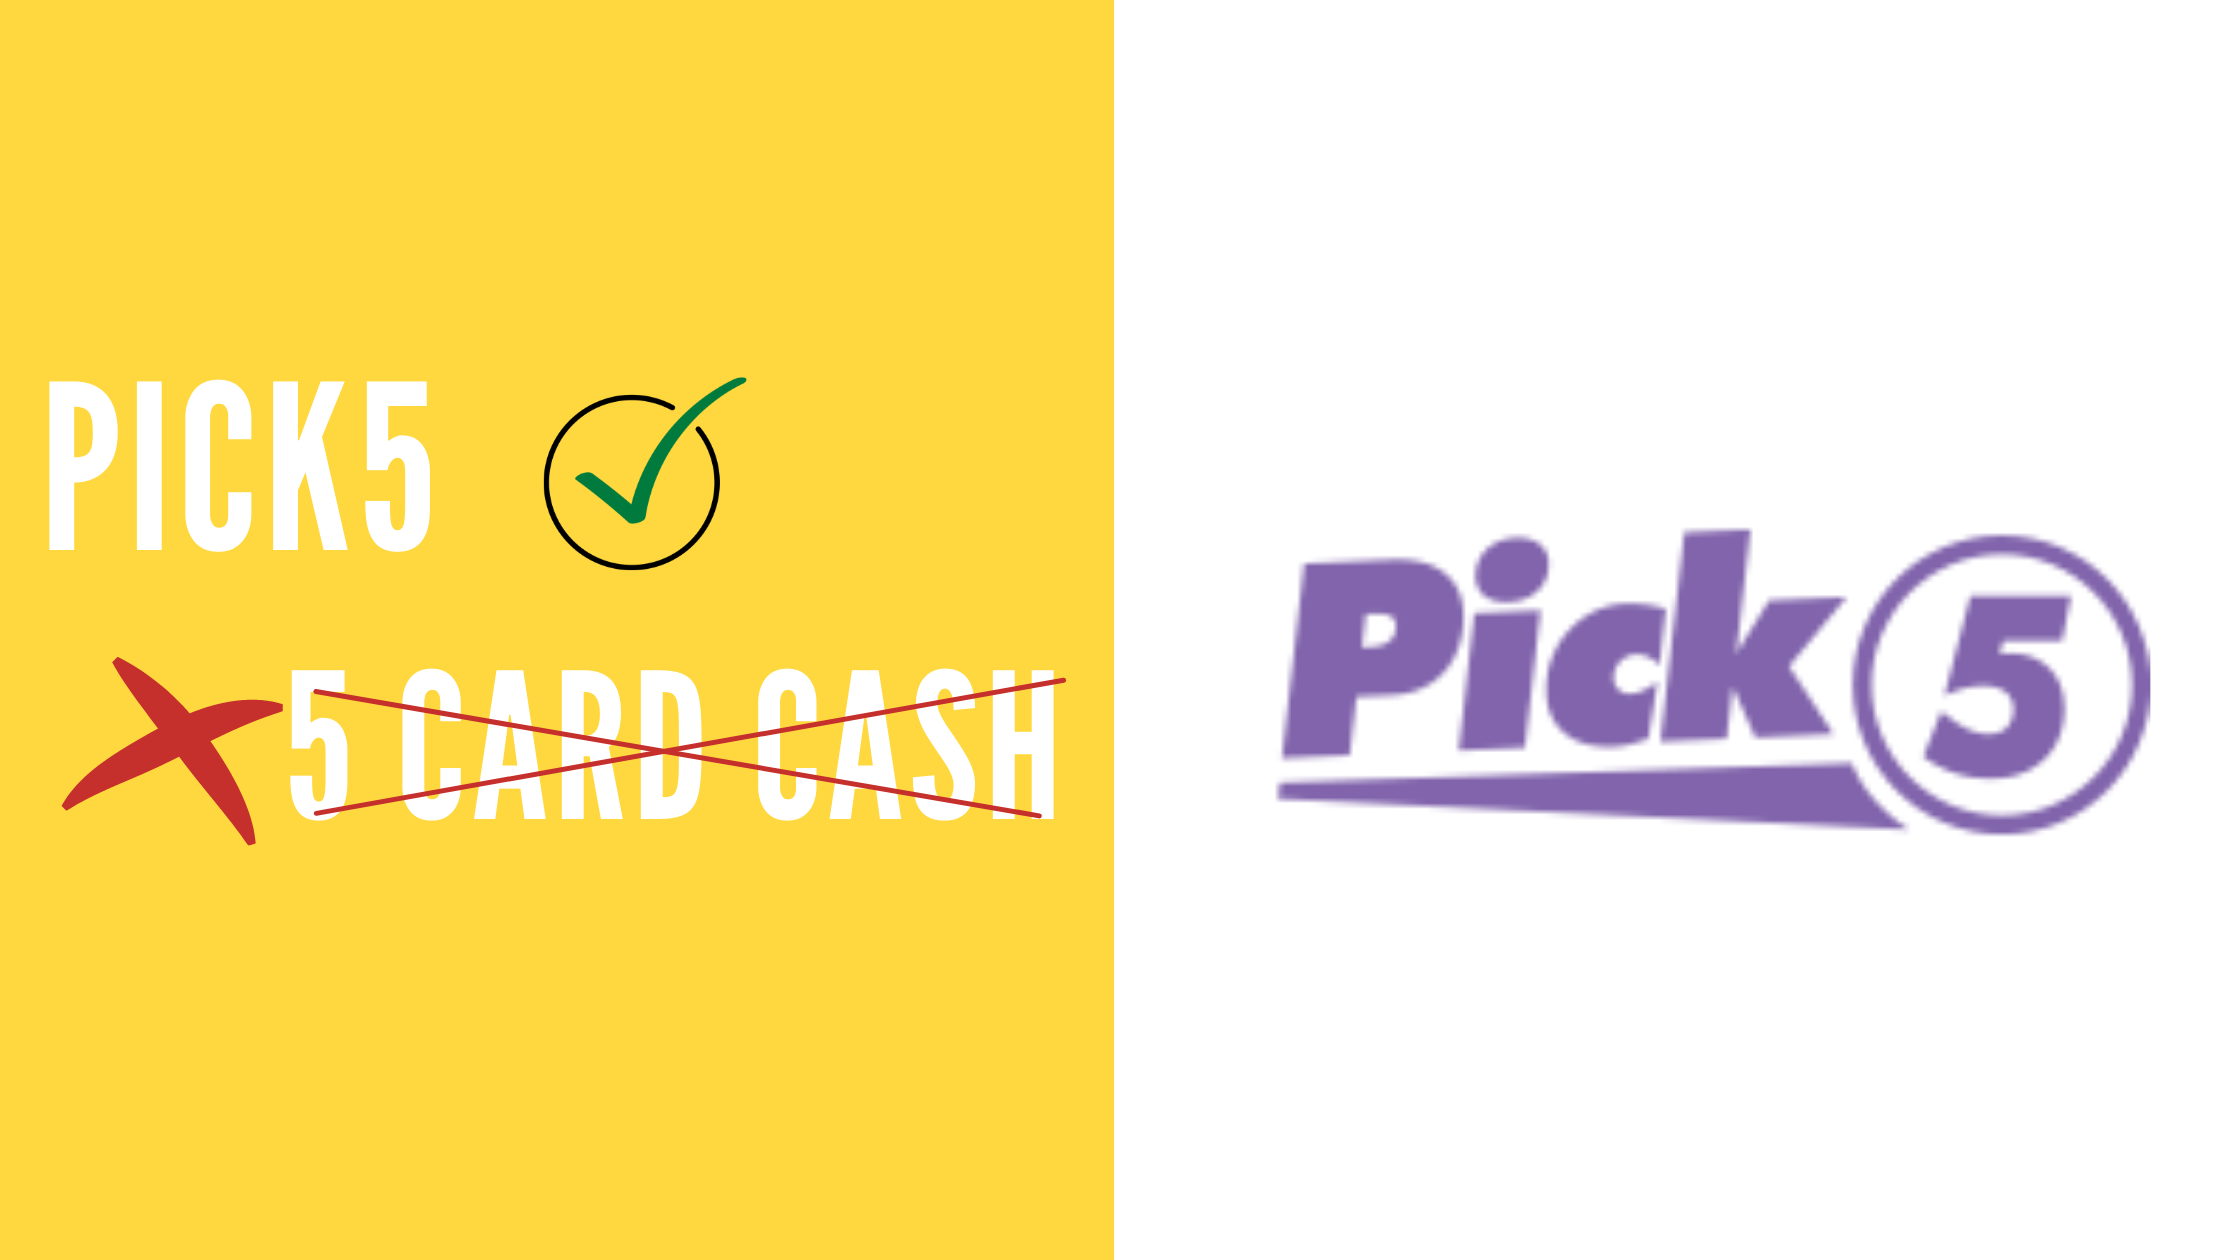 New Era had just began in Maryland Lottery as New Pick 5 replacing 5 Card Cash game